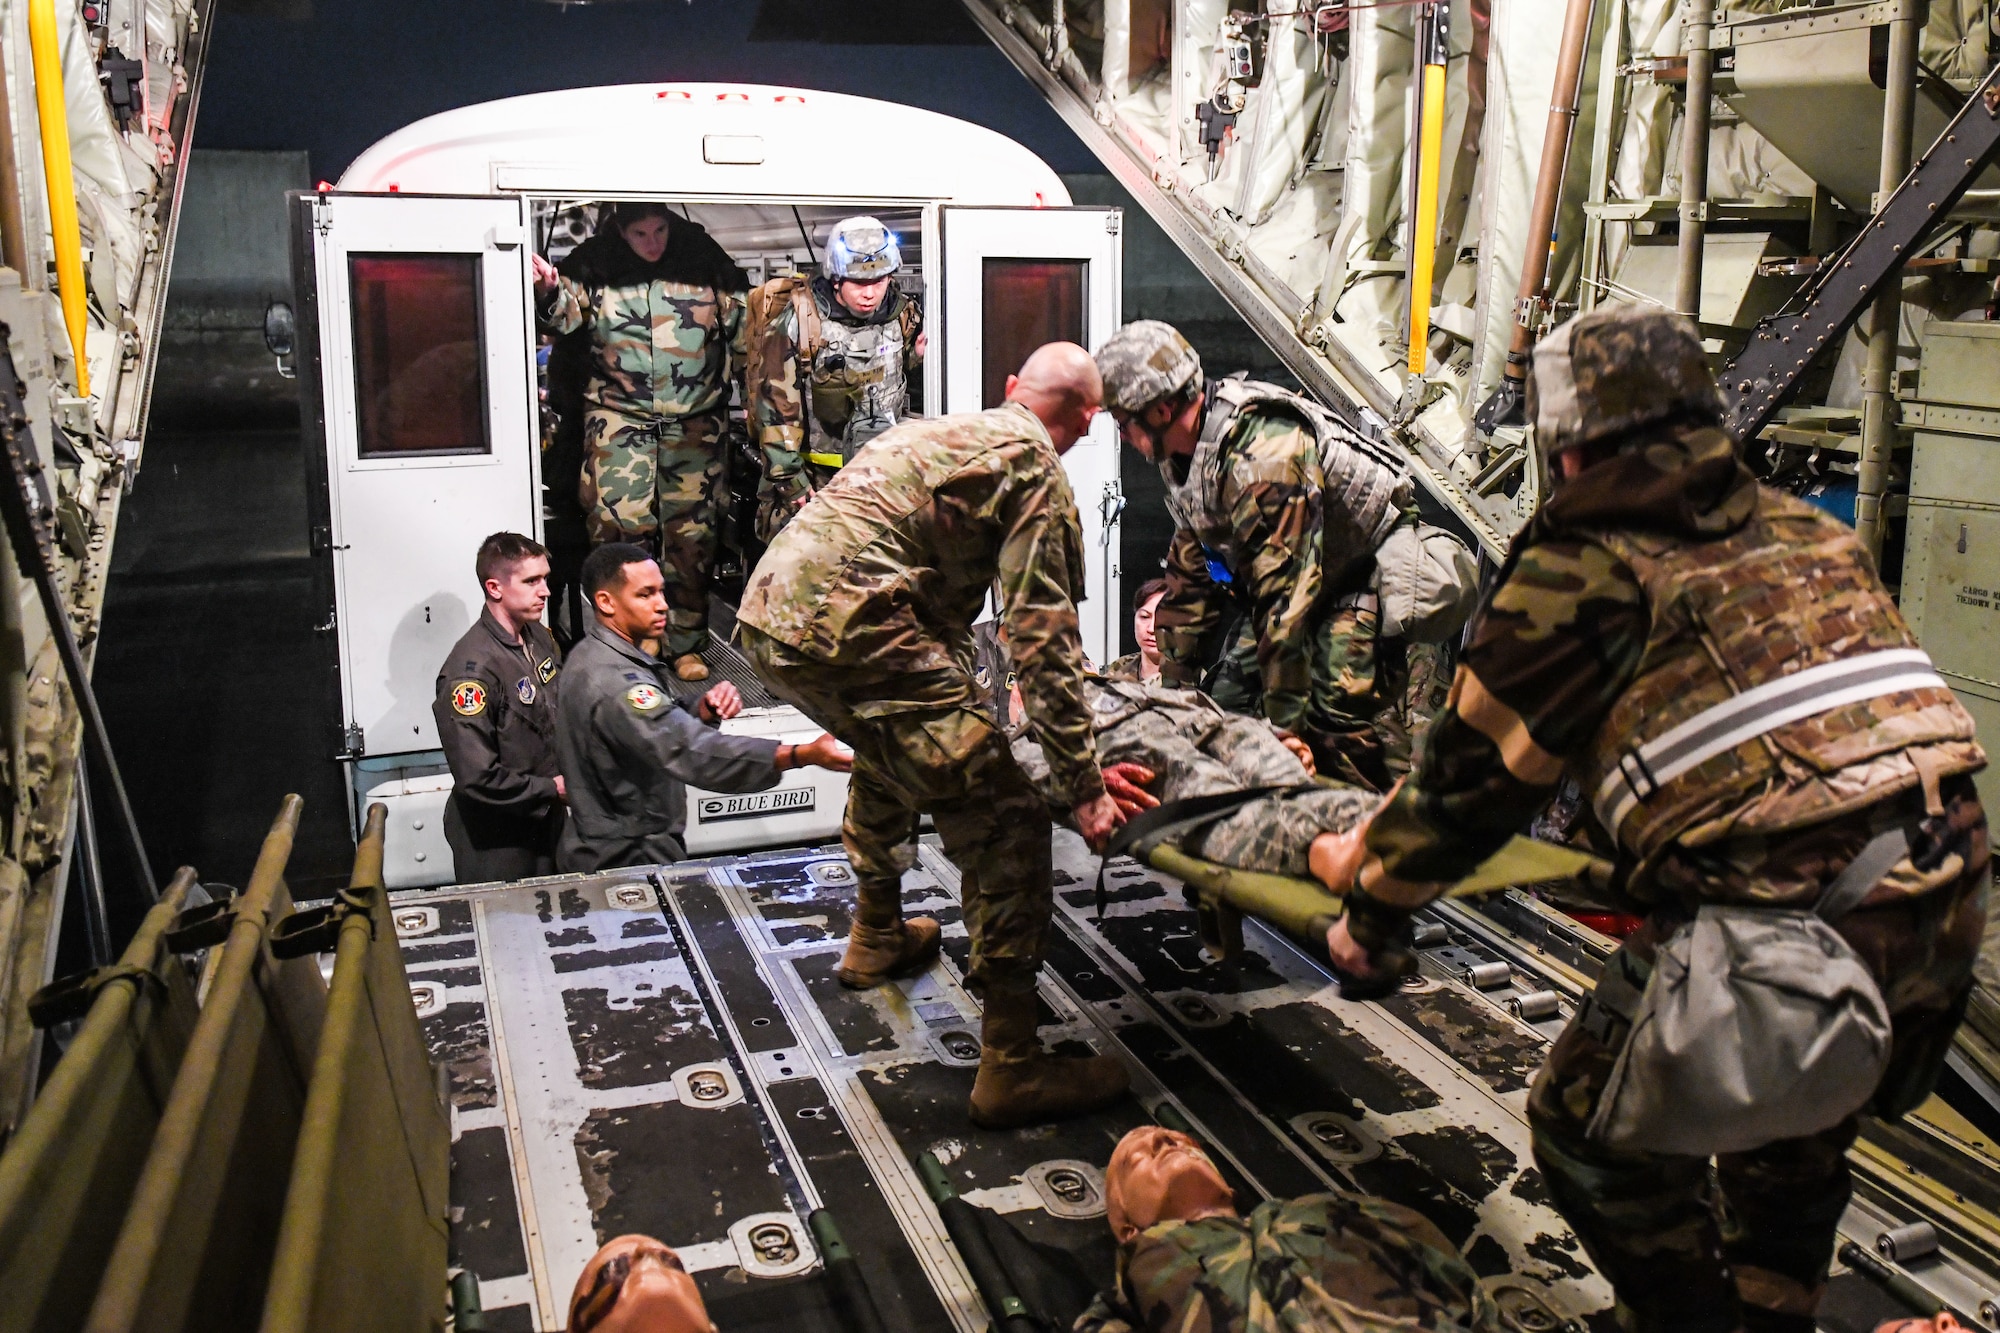 several airmen move injured on stretchers from a plane to a bus